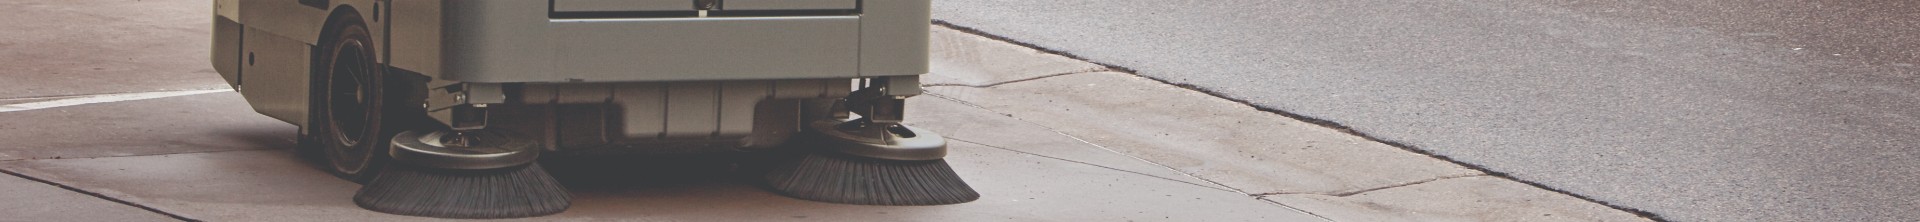 Southside Sweeping Case Study